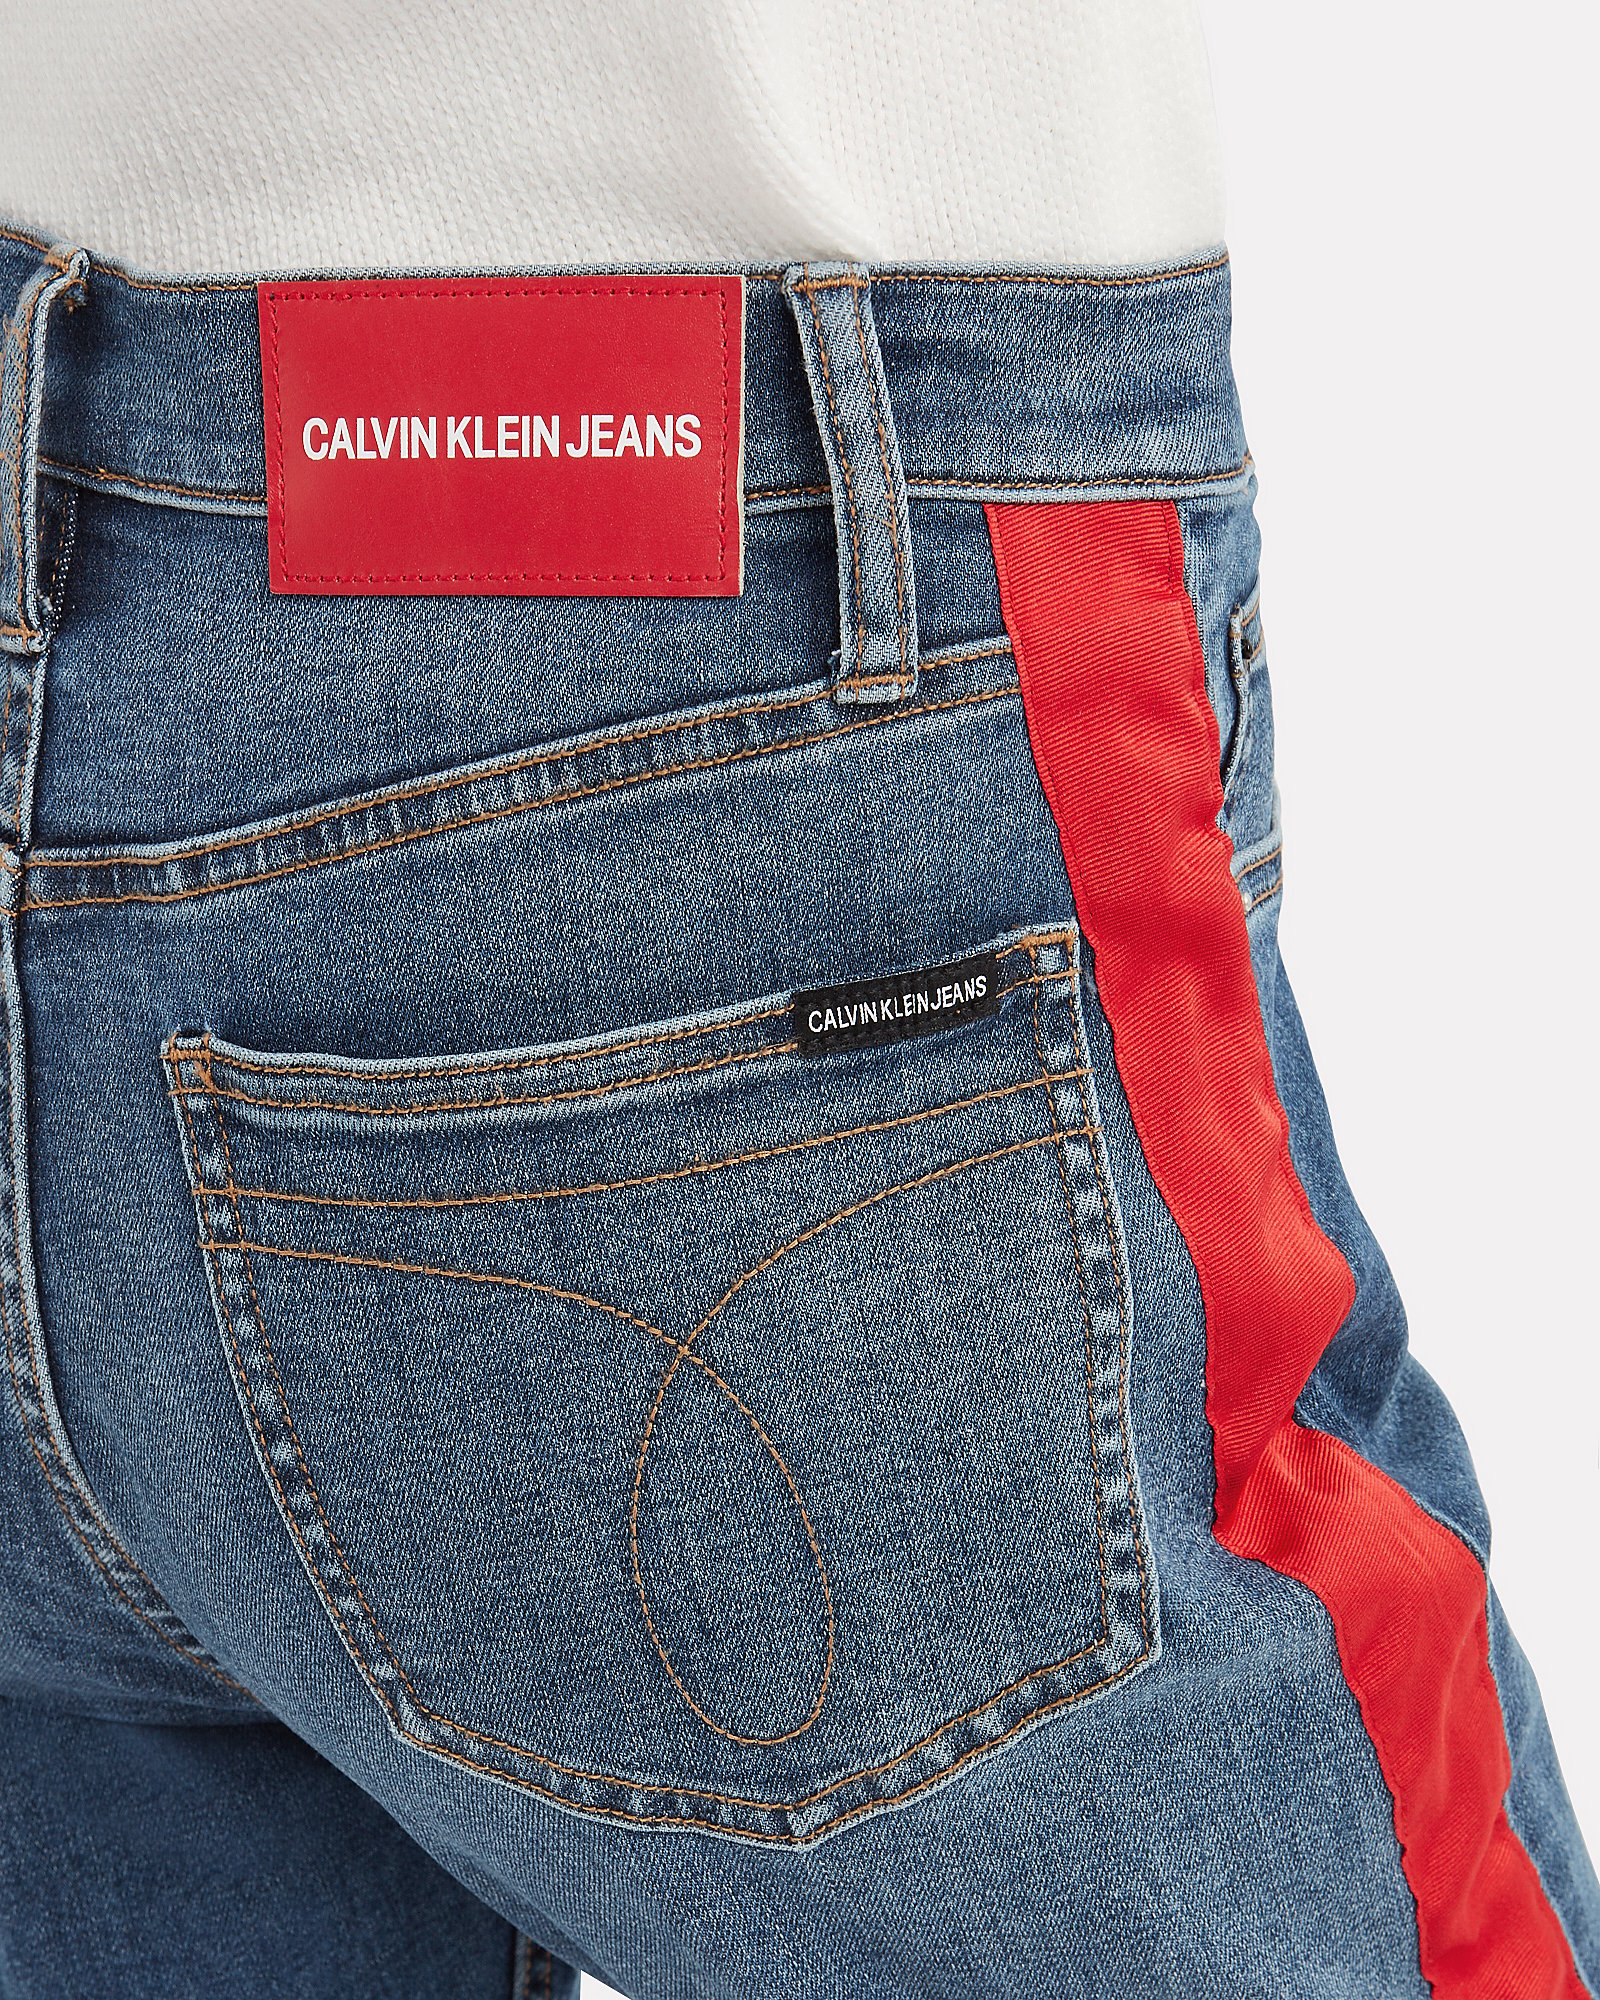 calvin klein jeans with red stripe